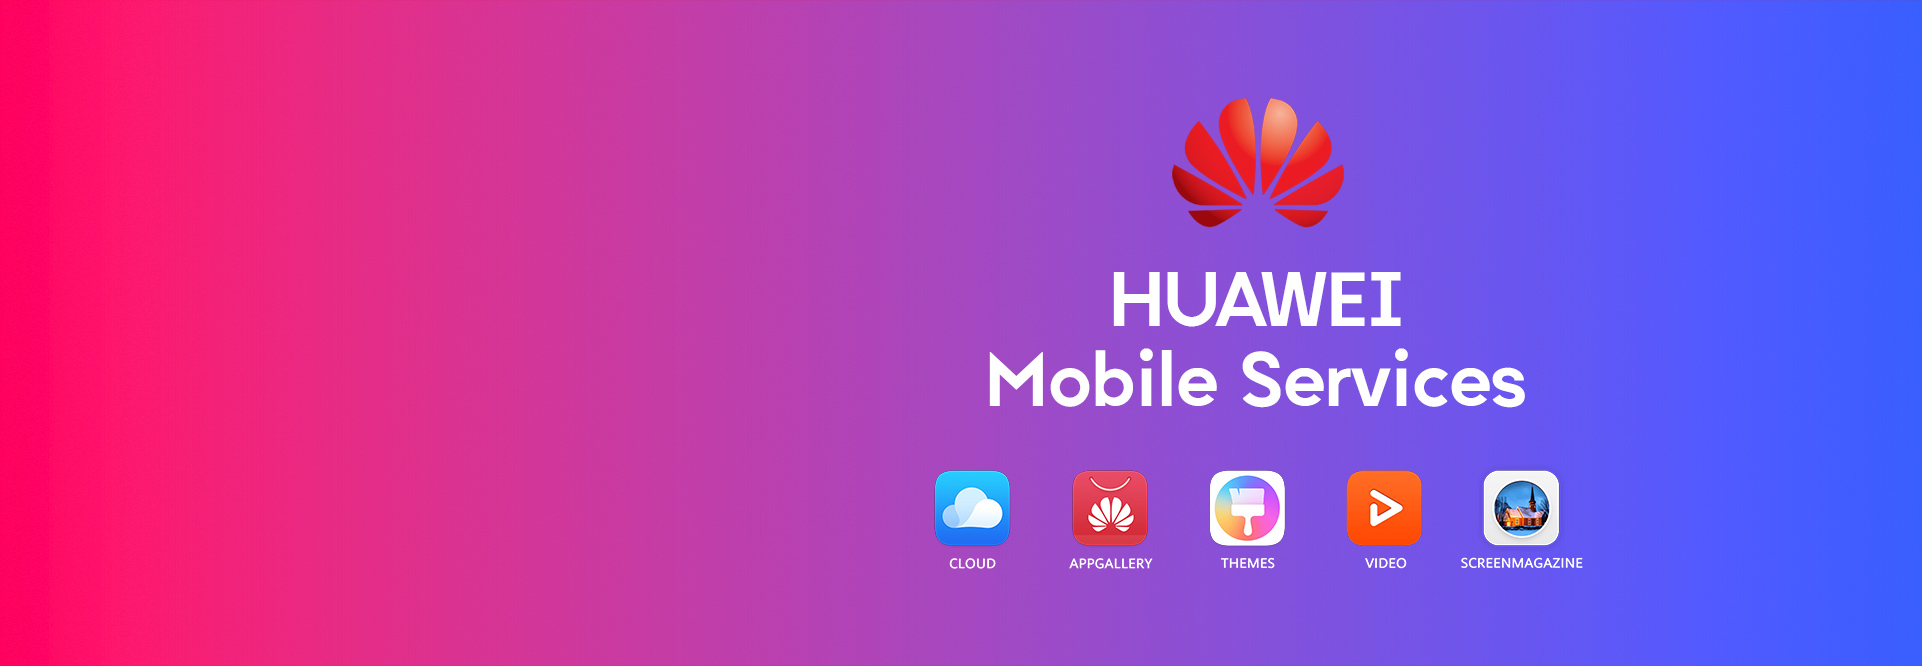 What You Should Know About Huawei Mobile Services (HMS)